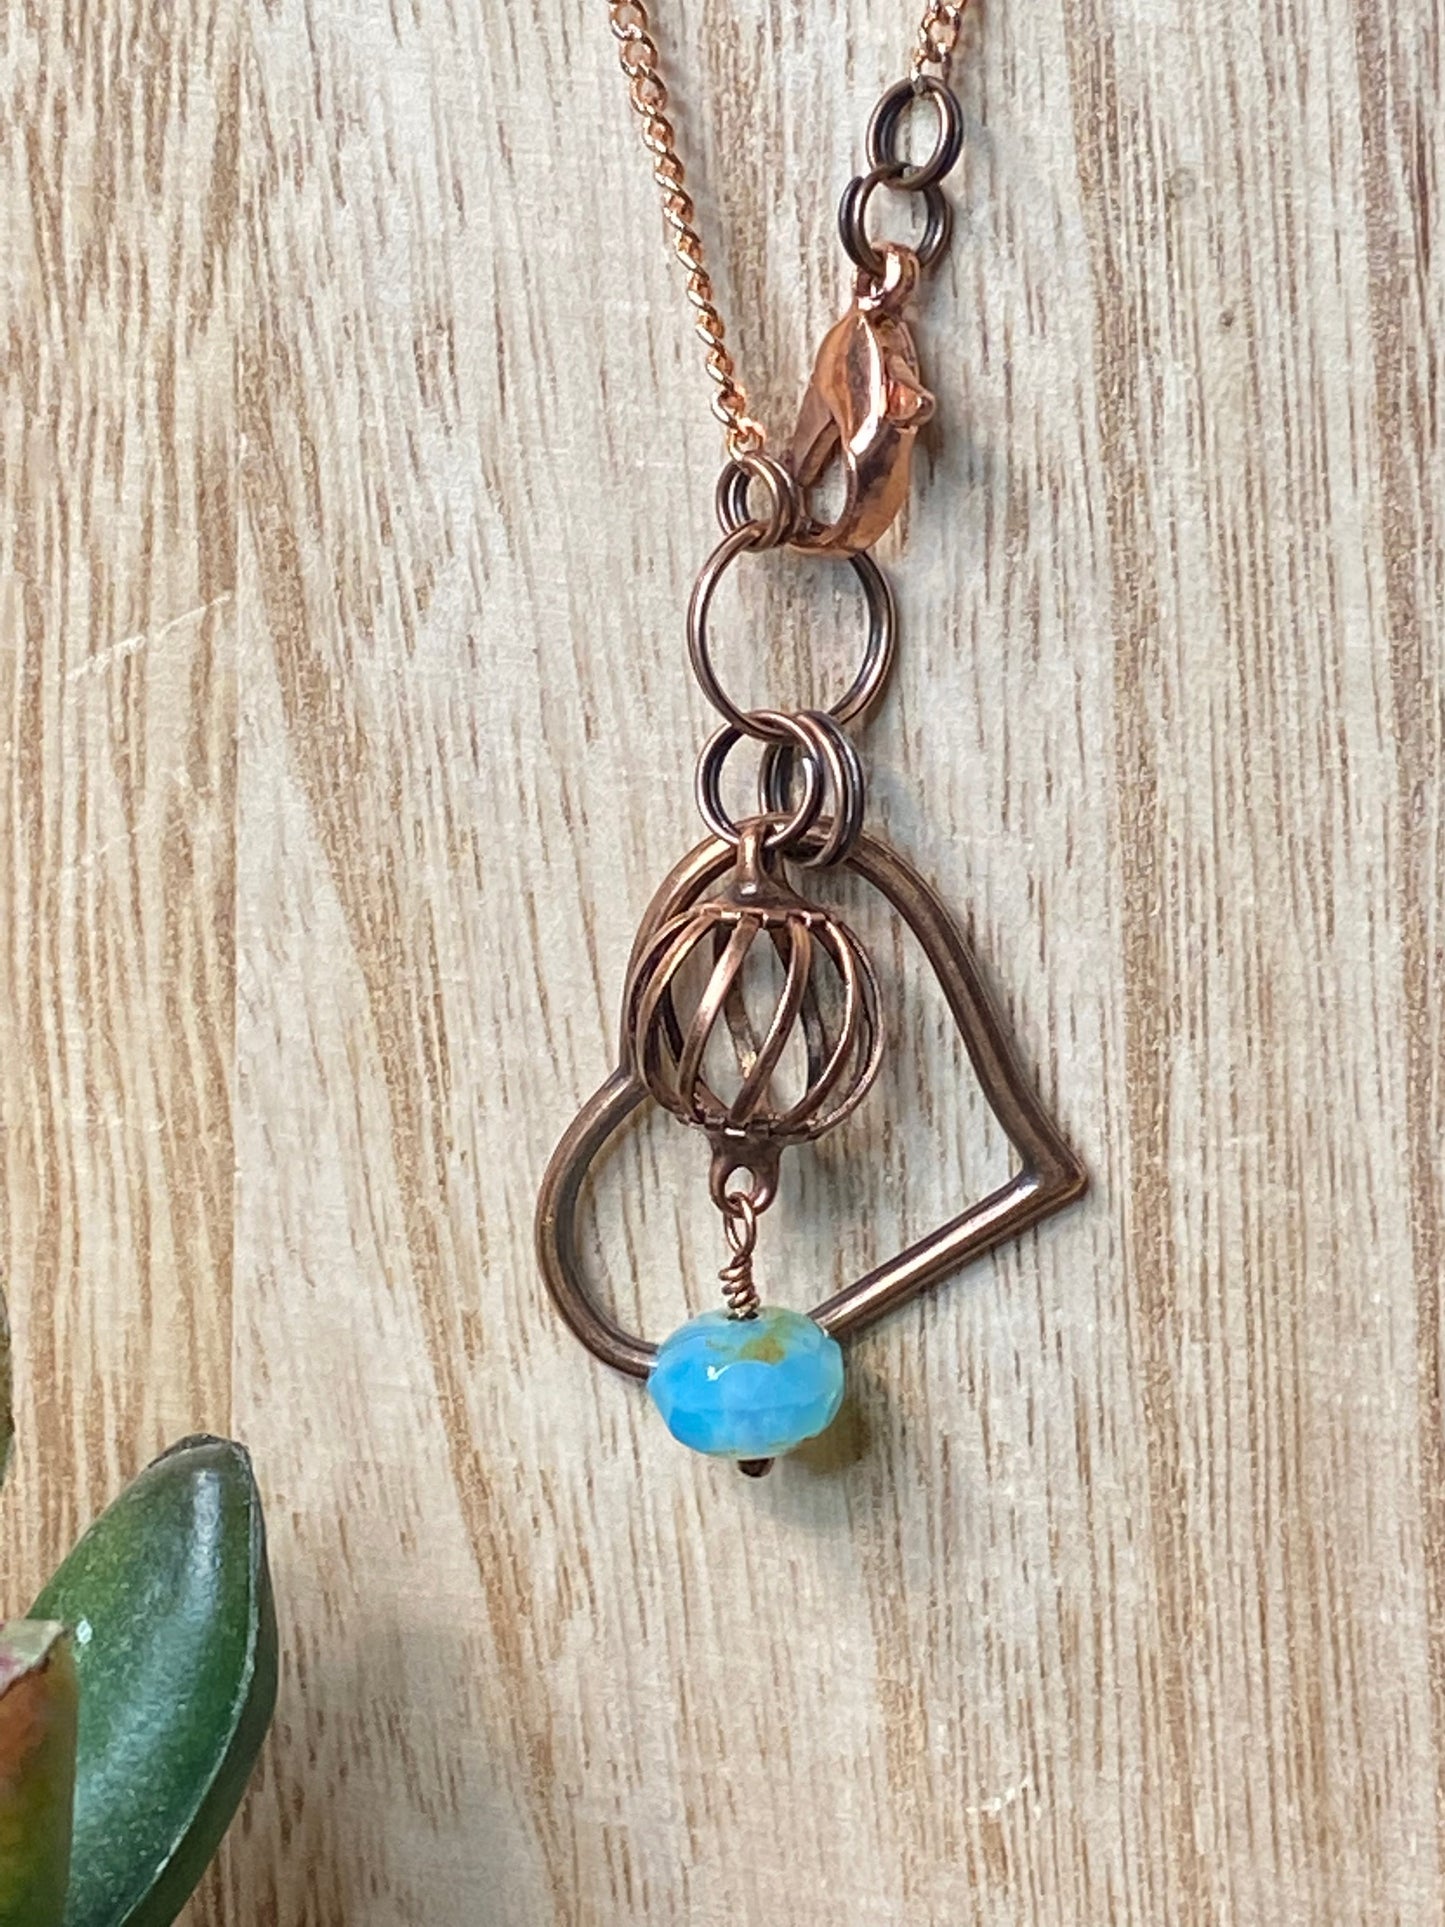 Necklace -30,33,36” Adjustable w/Reclaimed Copper Heart, Sea Blue Czech Faceted Accent, on a Copper Cable Chain